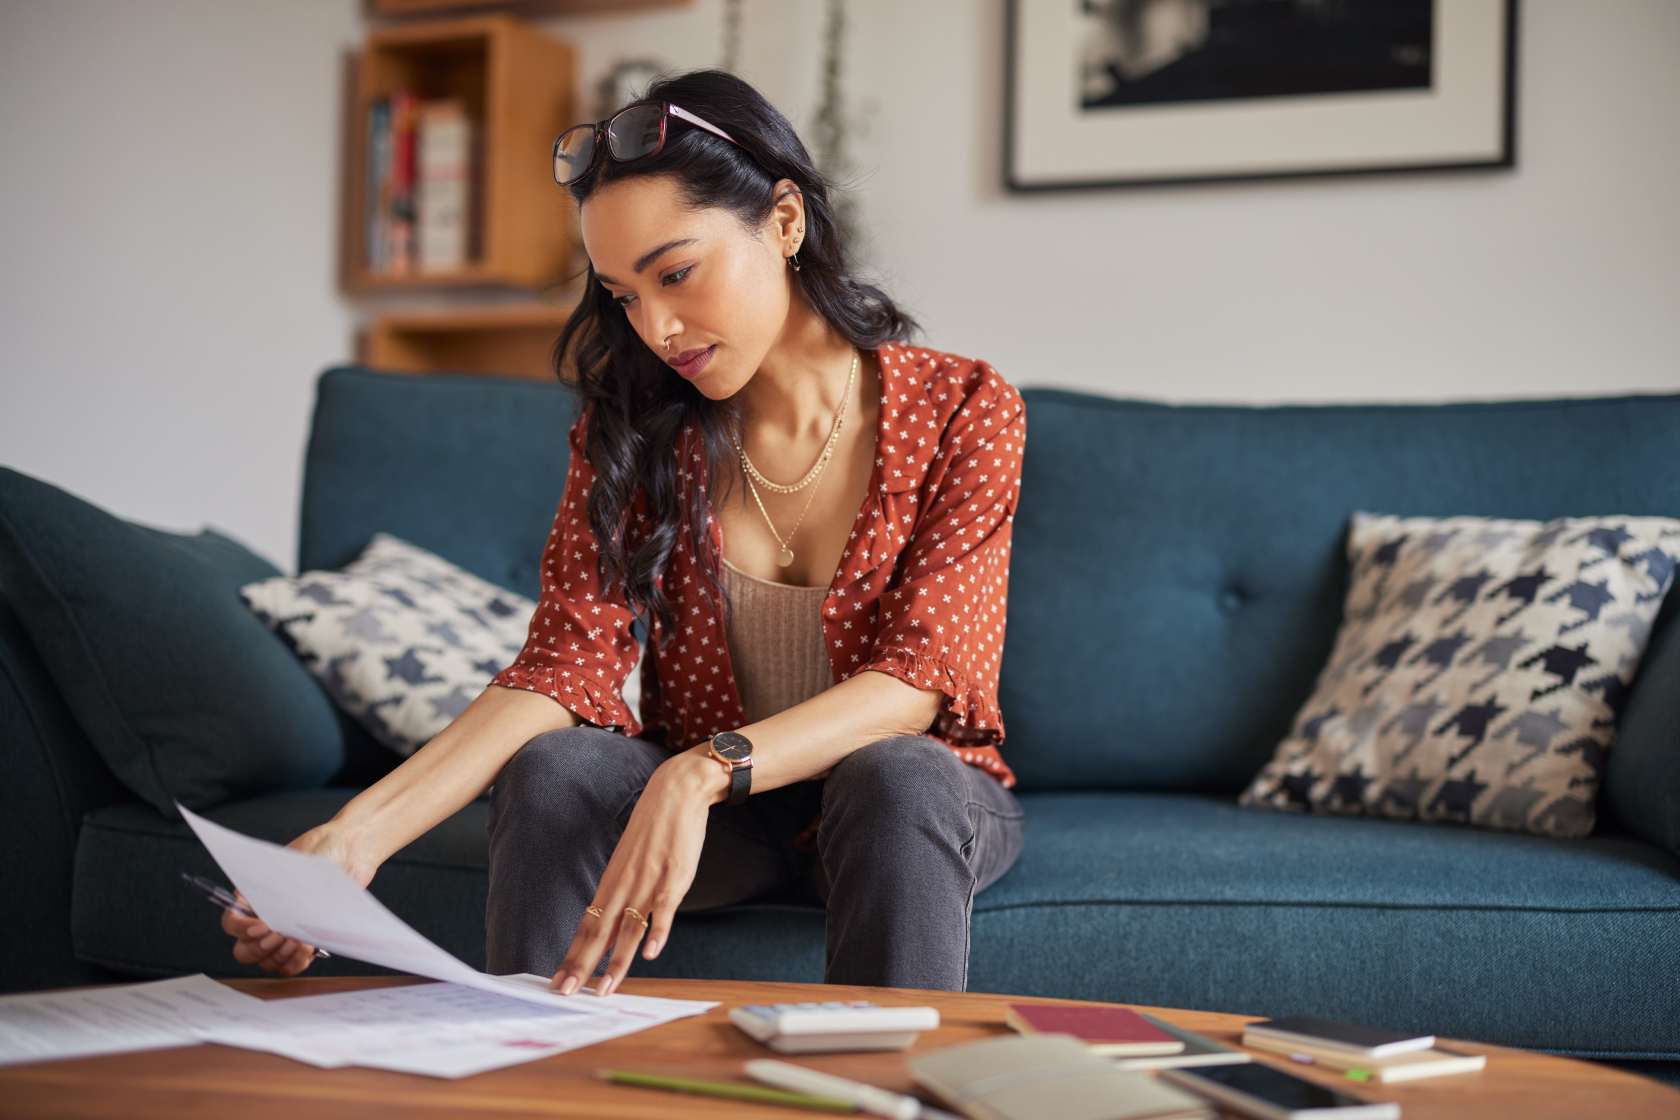 A woman sits on a blue couch and sifts through paperwork on a coffee table. Learn which business expenses vs. personal expenses are deductible.